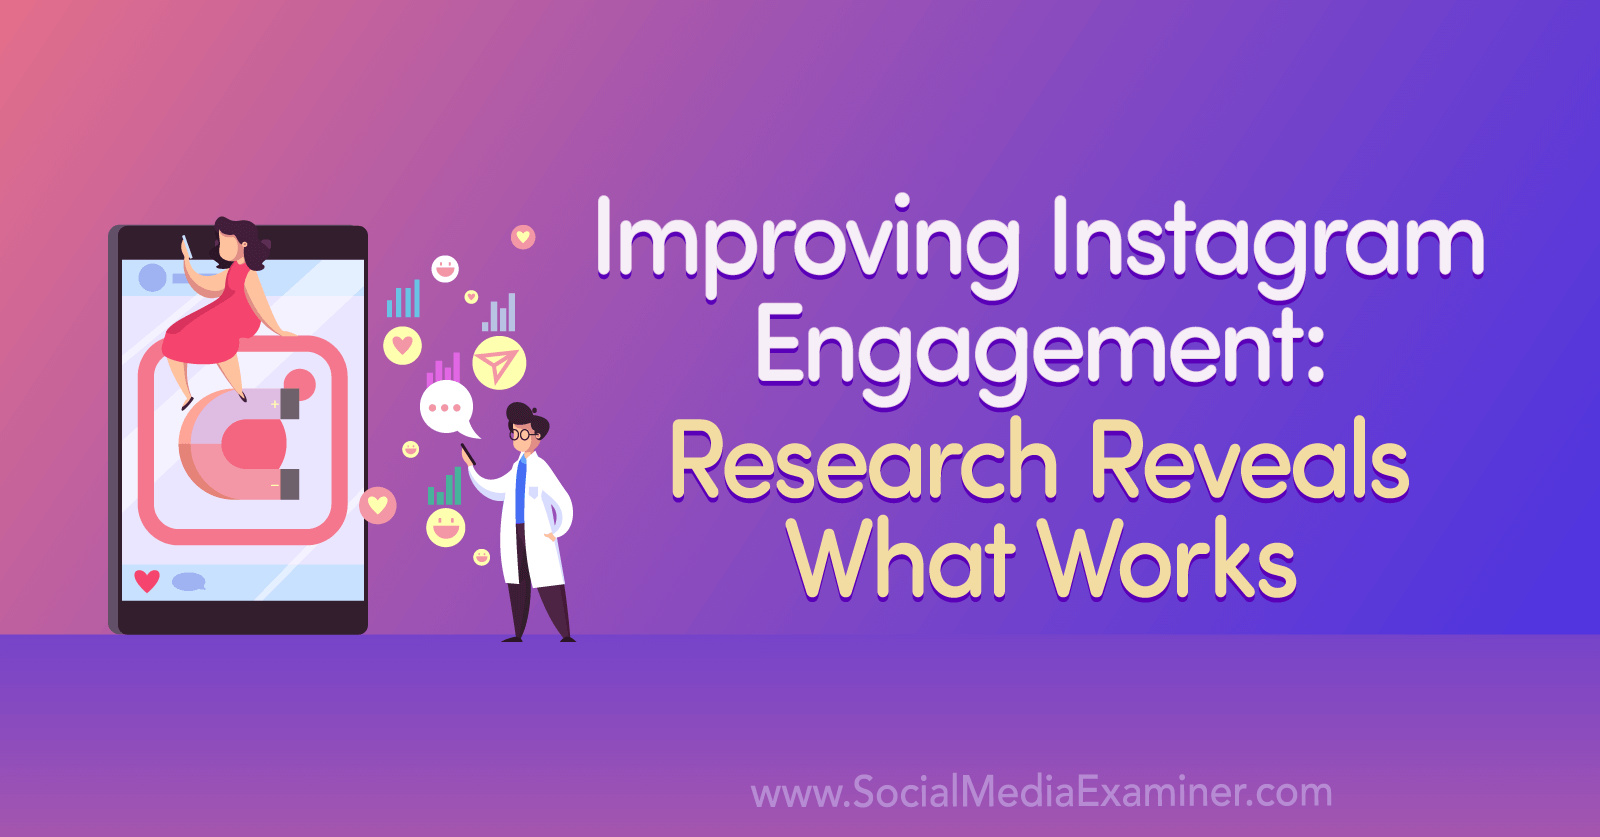 Improving Instagram Engagement: Research Reveals What Works by Anna Sonnenberg on Social Media Examiner.